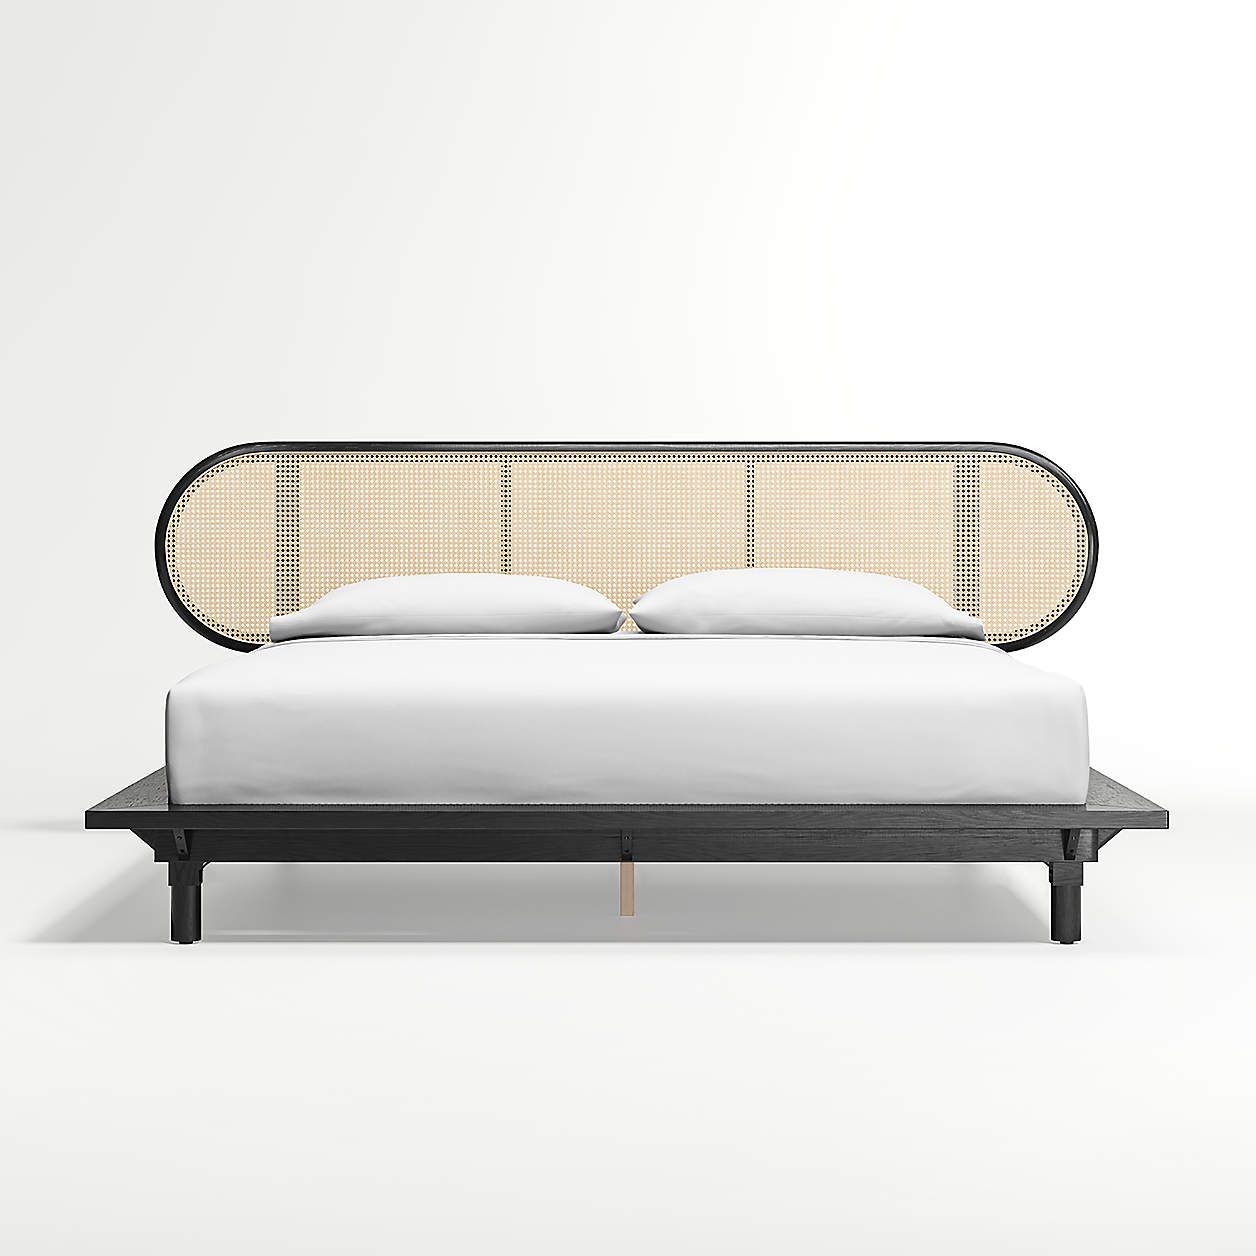 Anaise Cane King Bed Frame + Reviews | Crate & Barrel